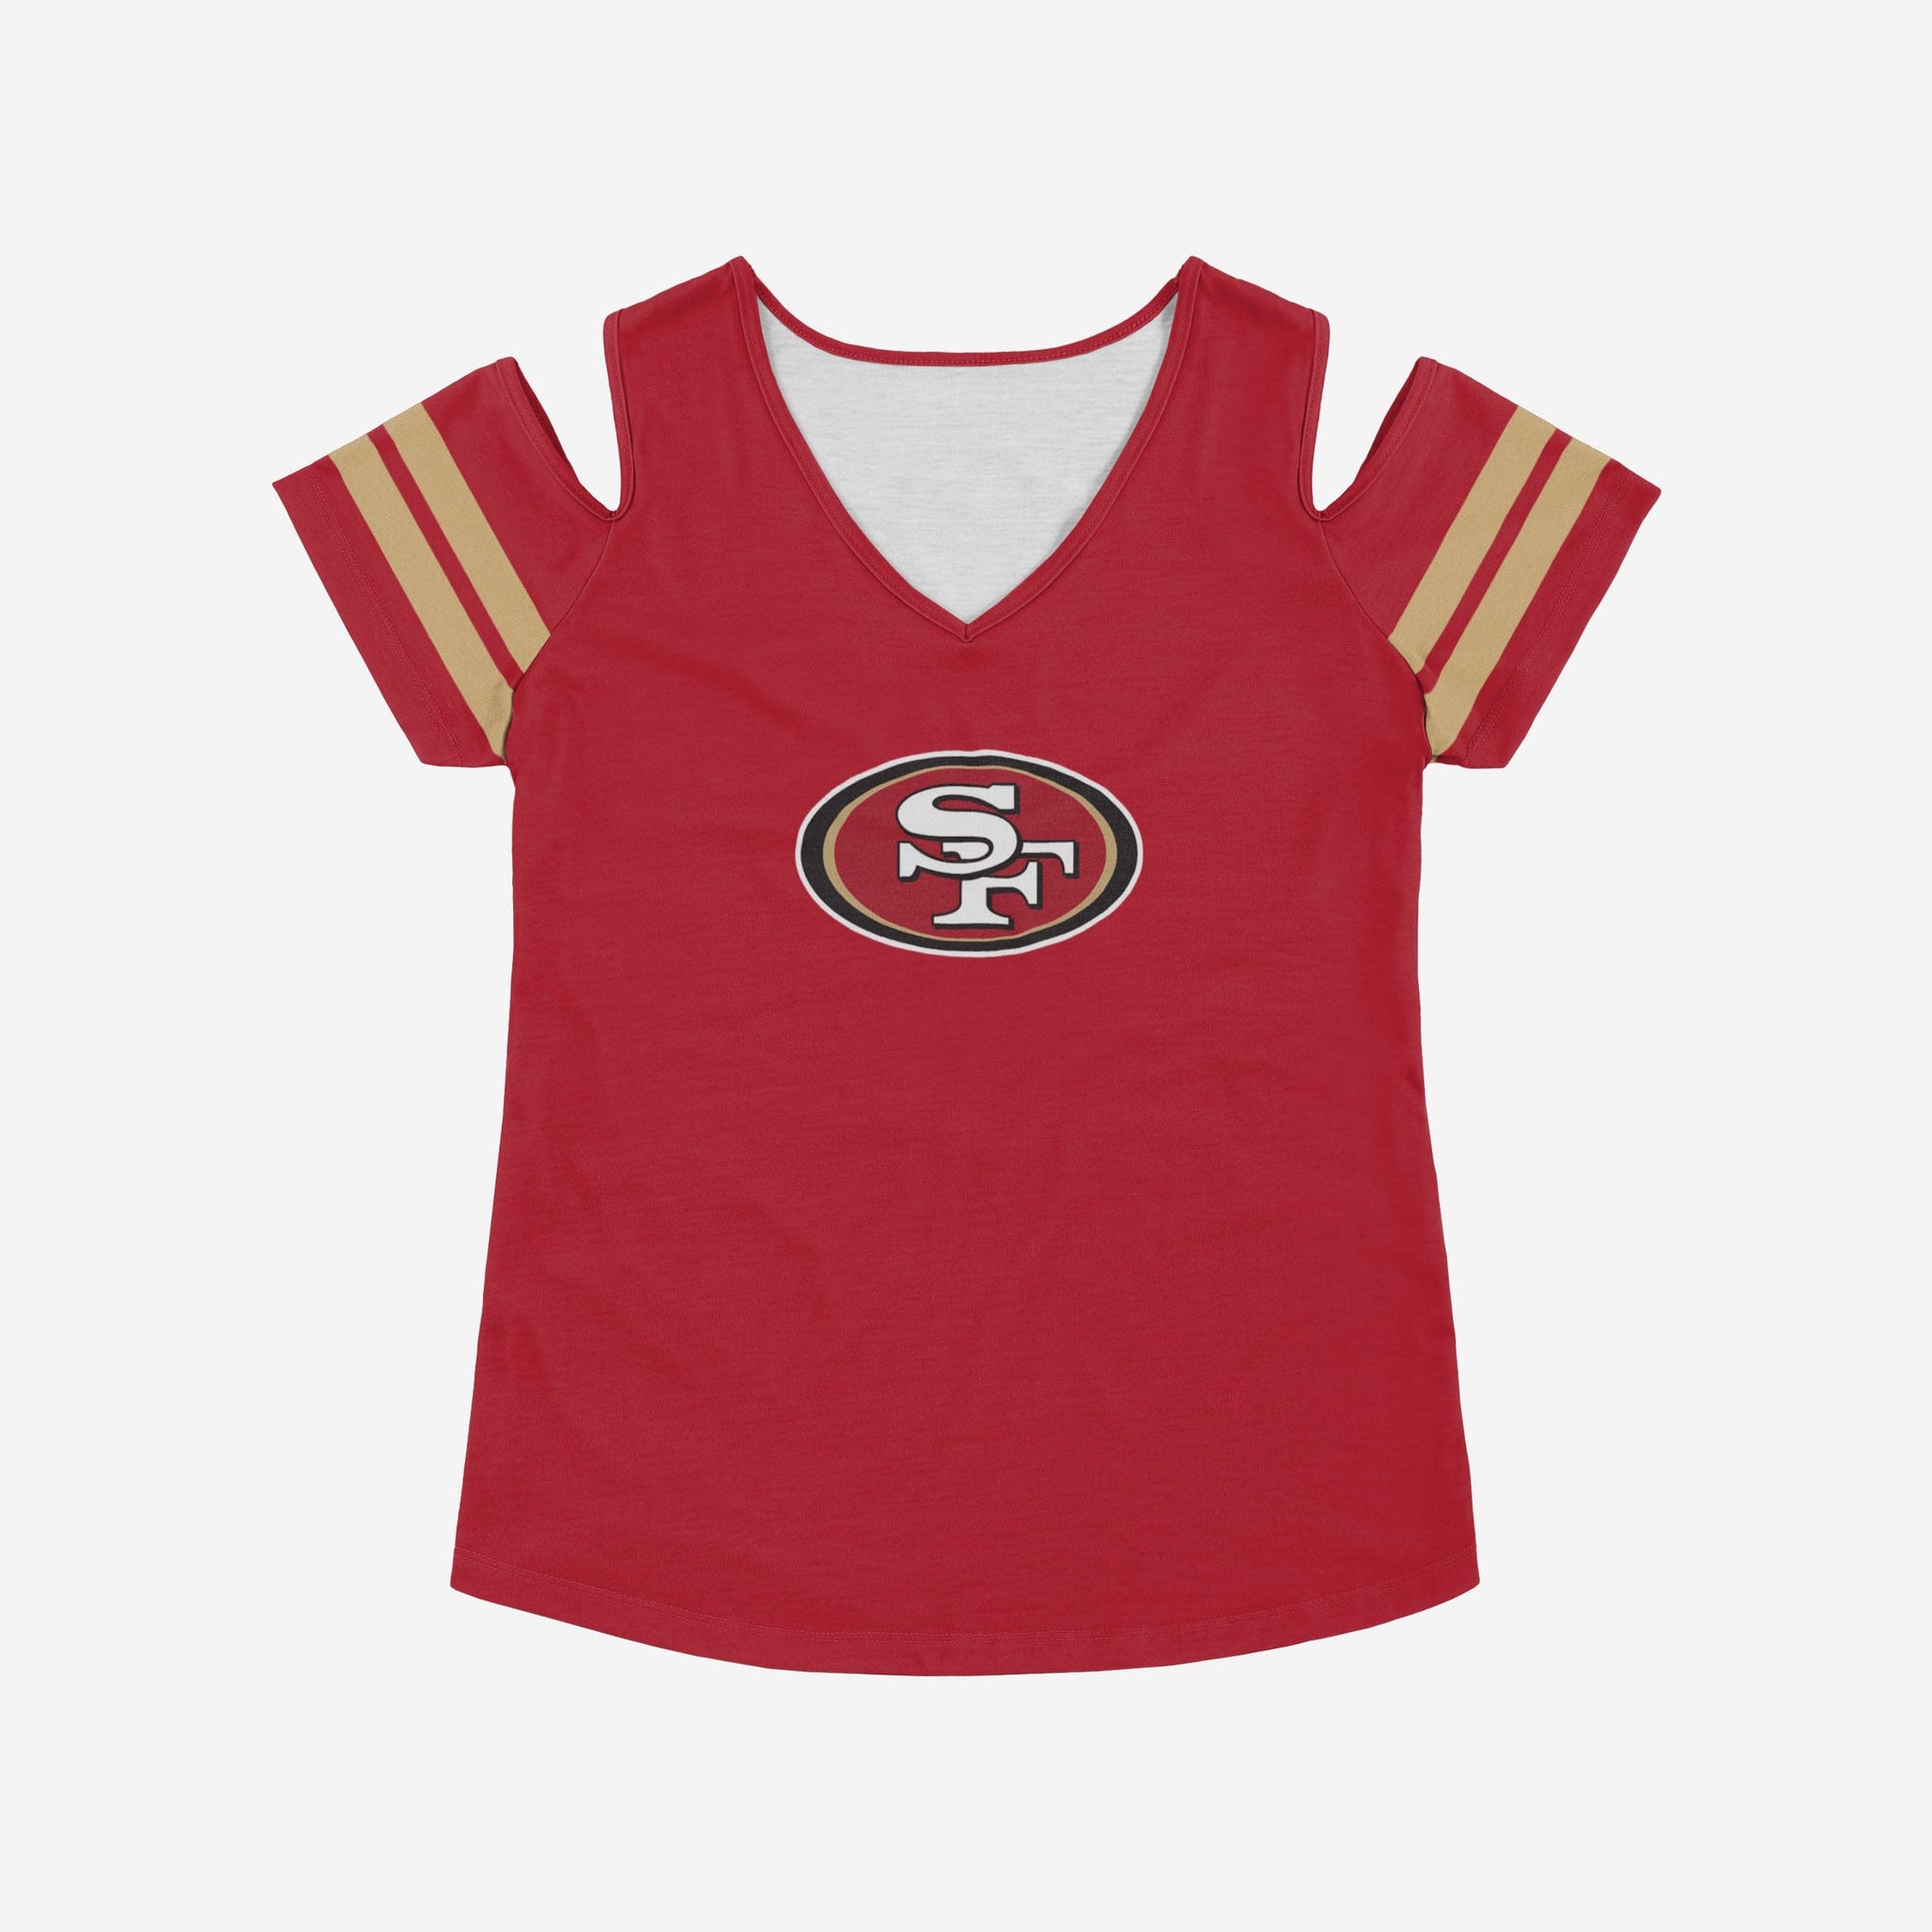 49ers sweaters for women